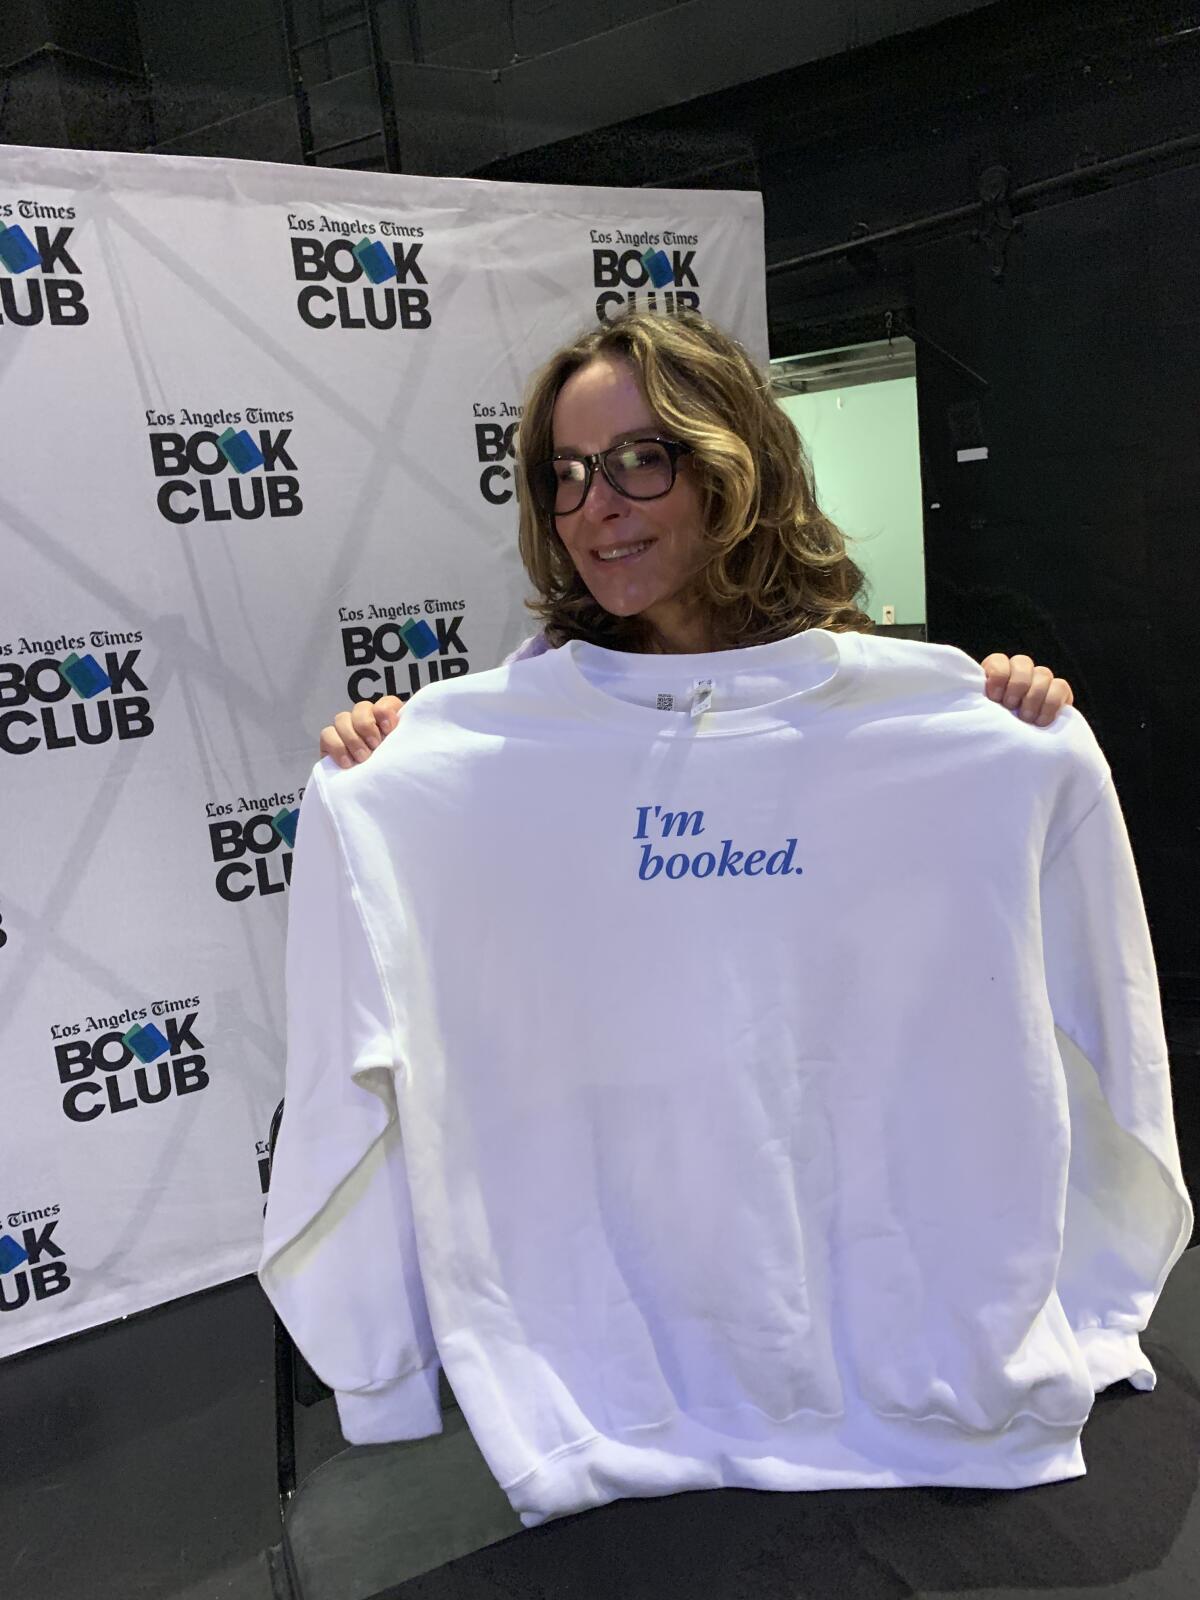 A woman wearing glasses holds up a white sweatshirt with the words "I'm Booked" on it in blue.